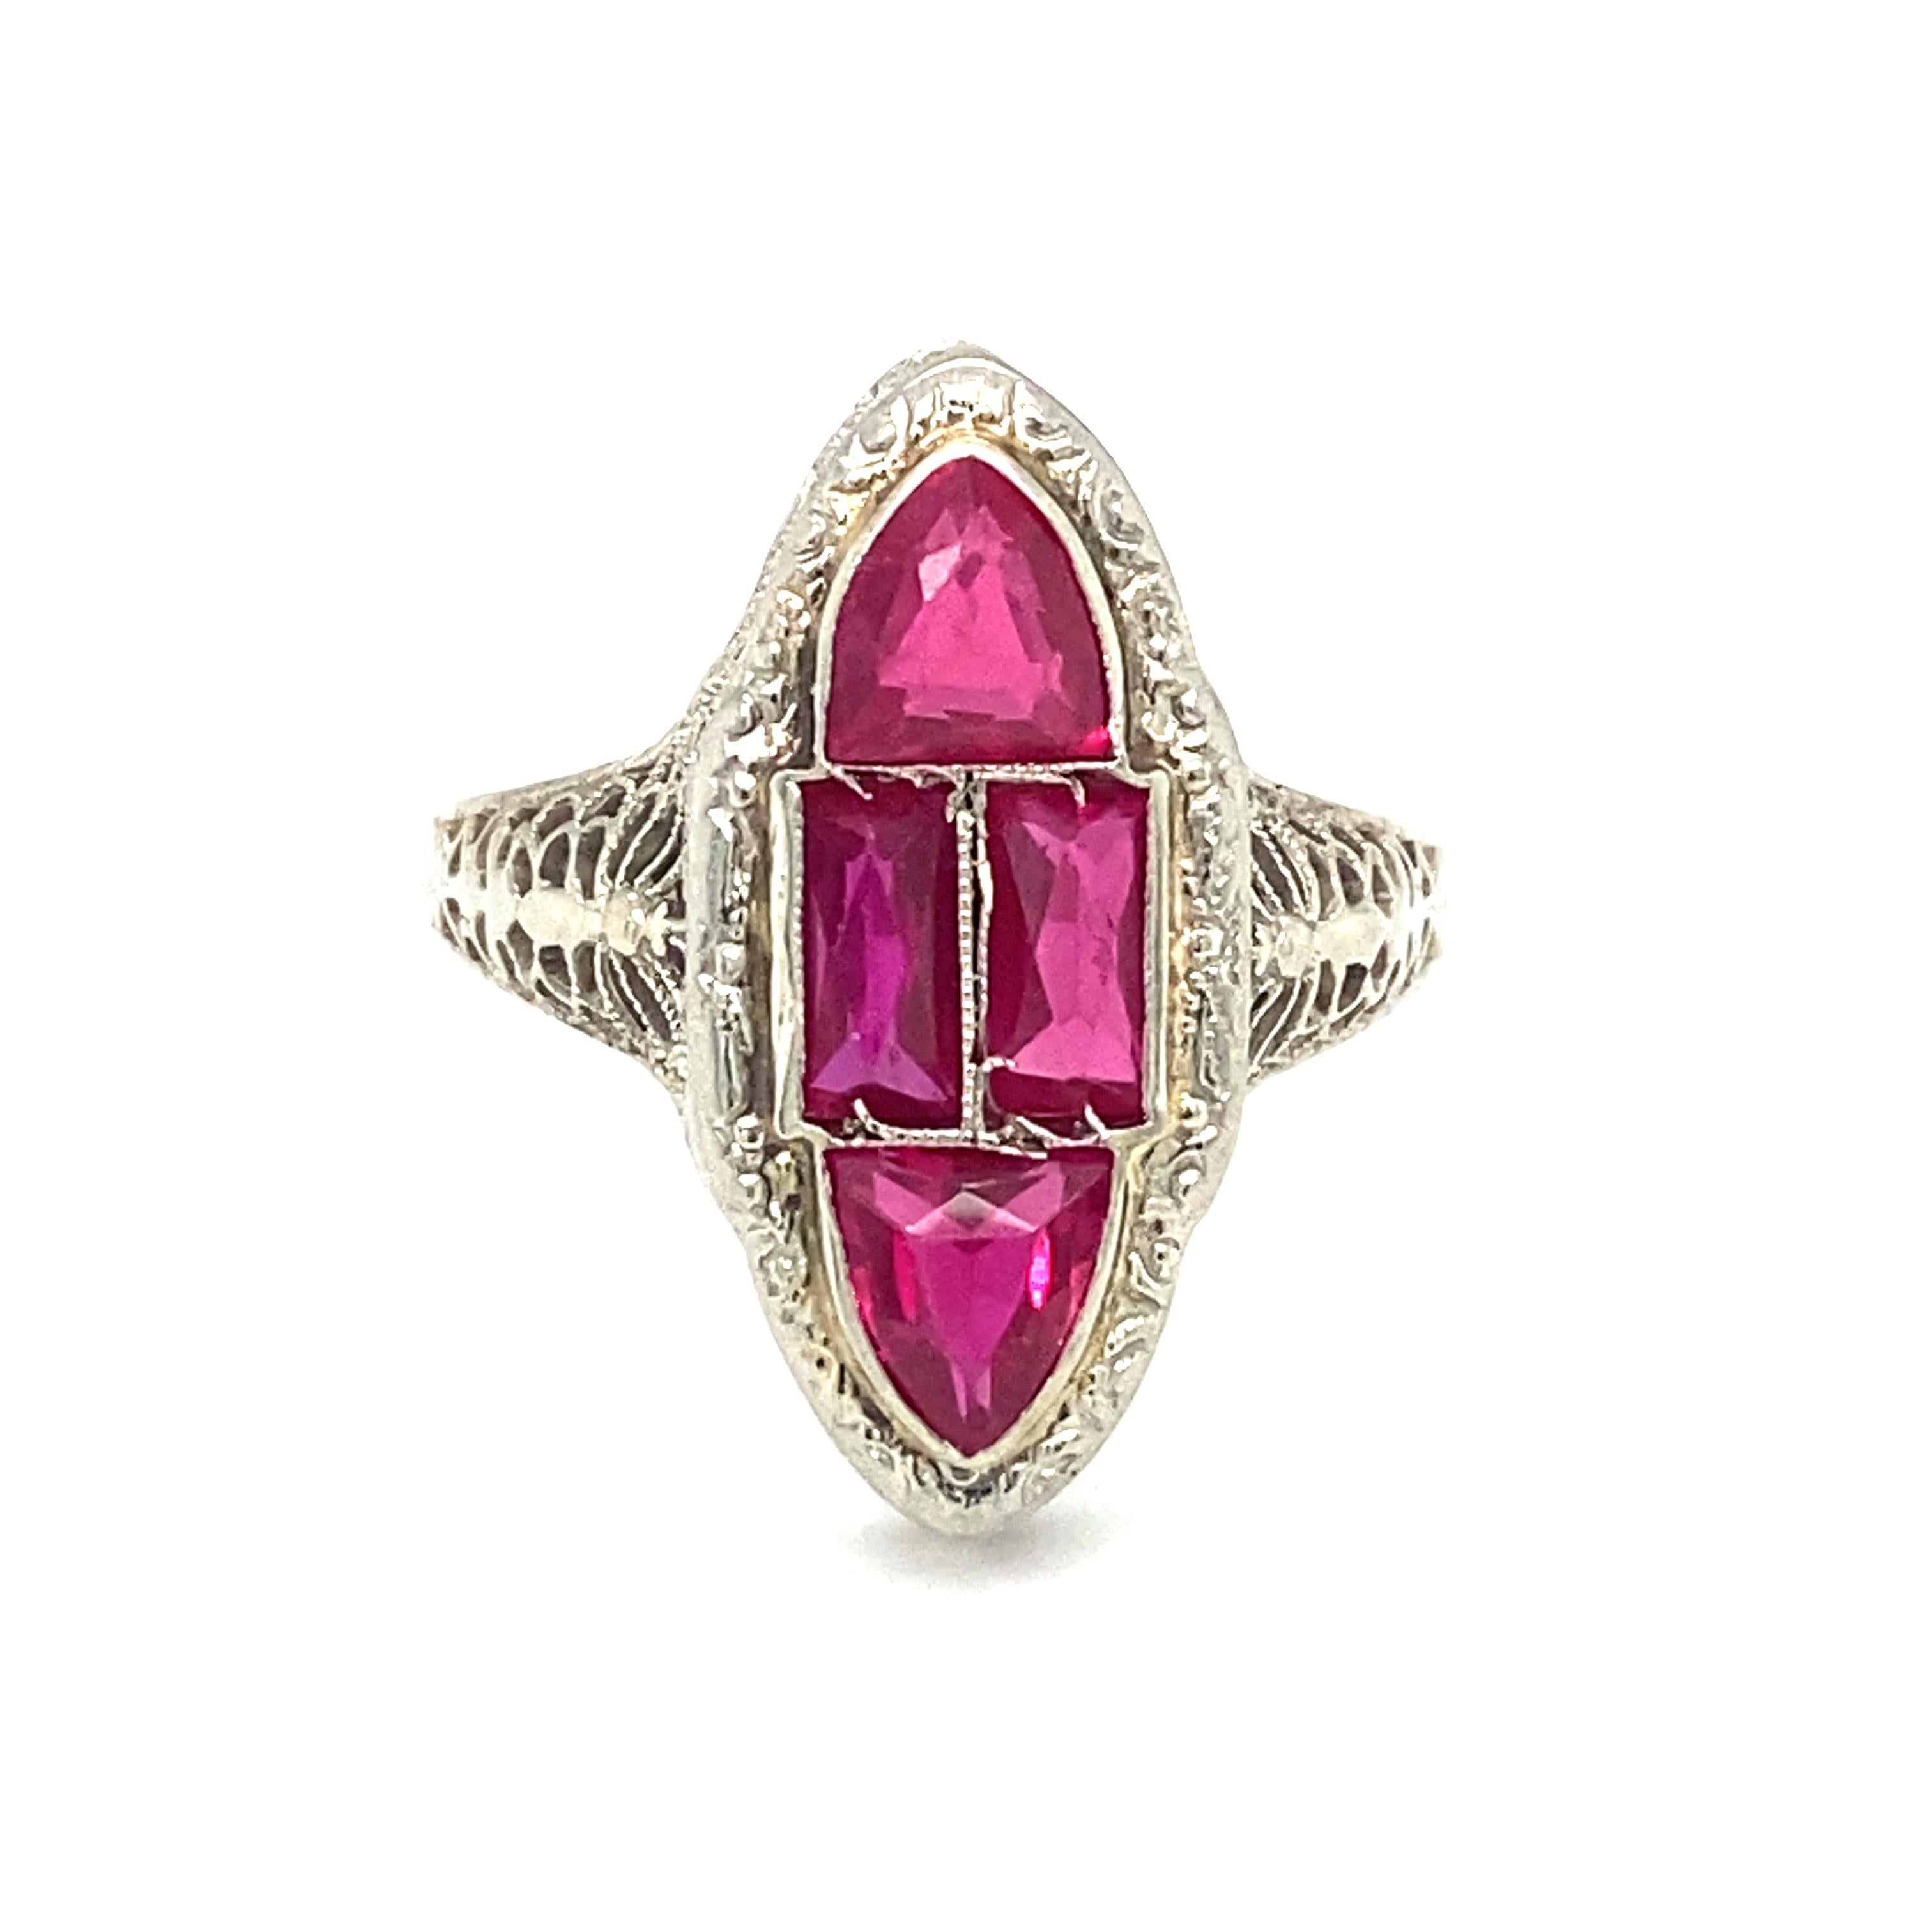 Circa 1920s Art Deco Simulated Ruby Cocktail Ring in 14 Karat White Gold In Excellent Condition For Sale In Atlanta, GA